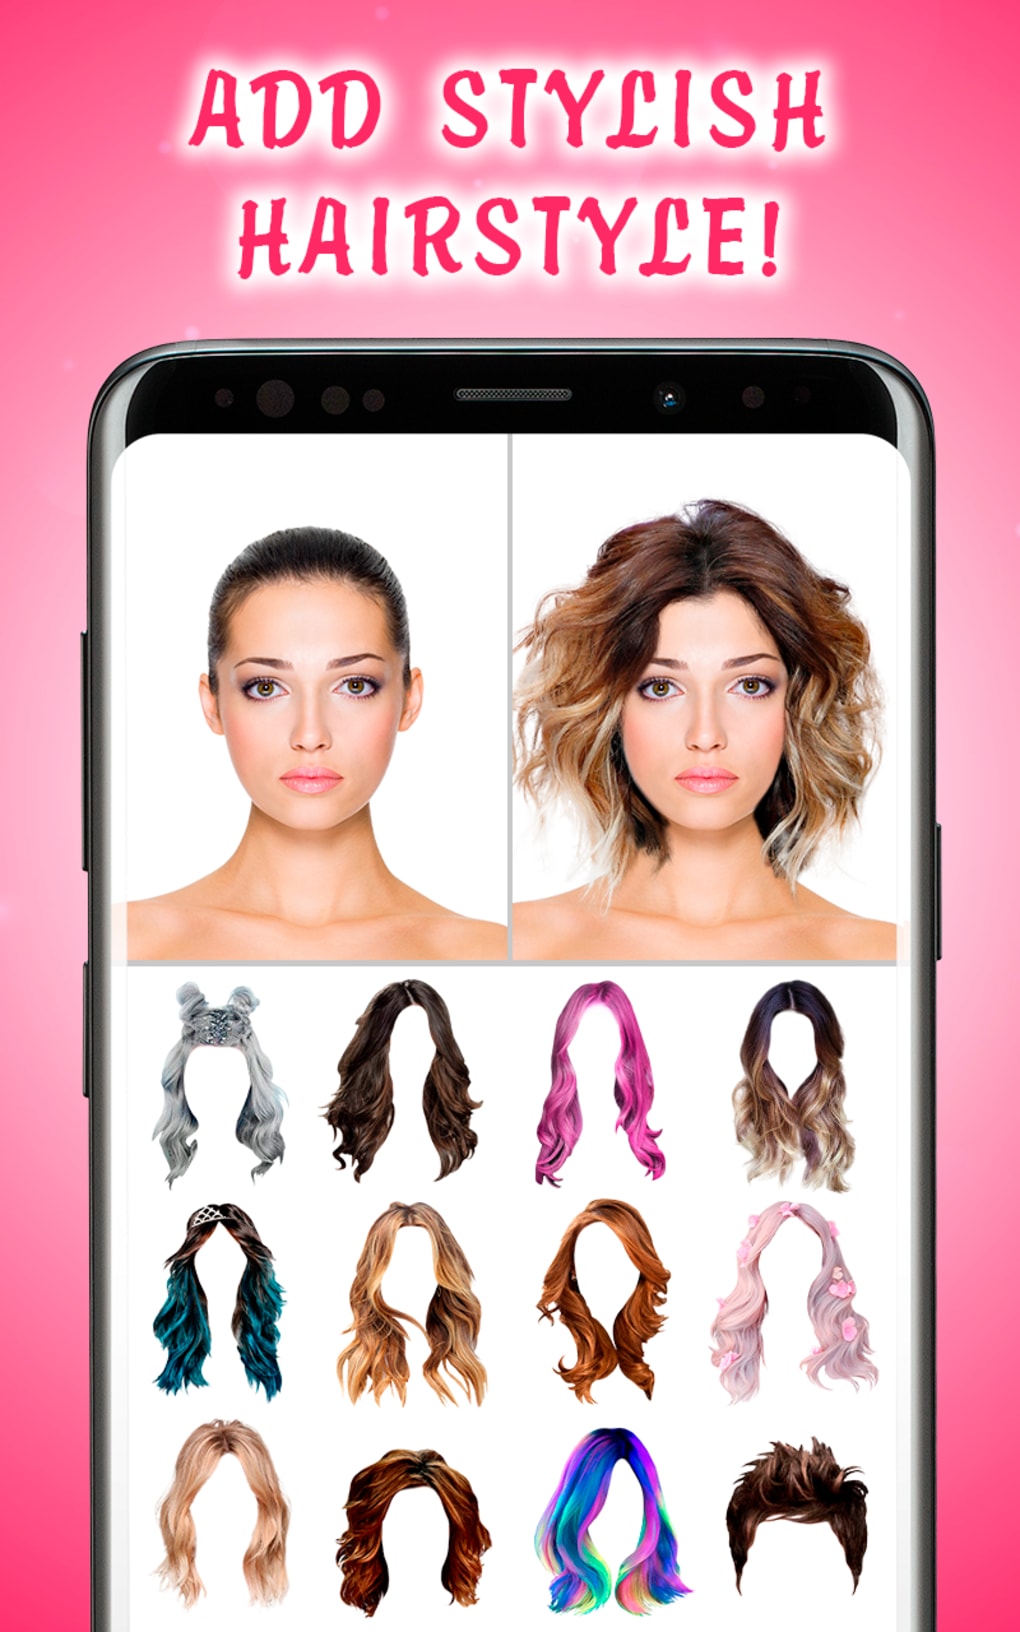 Free][App] Unique Hairstyle and Hair Cuts | Android Central